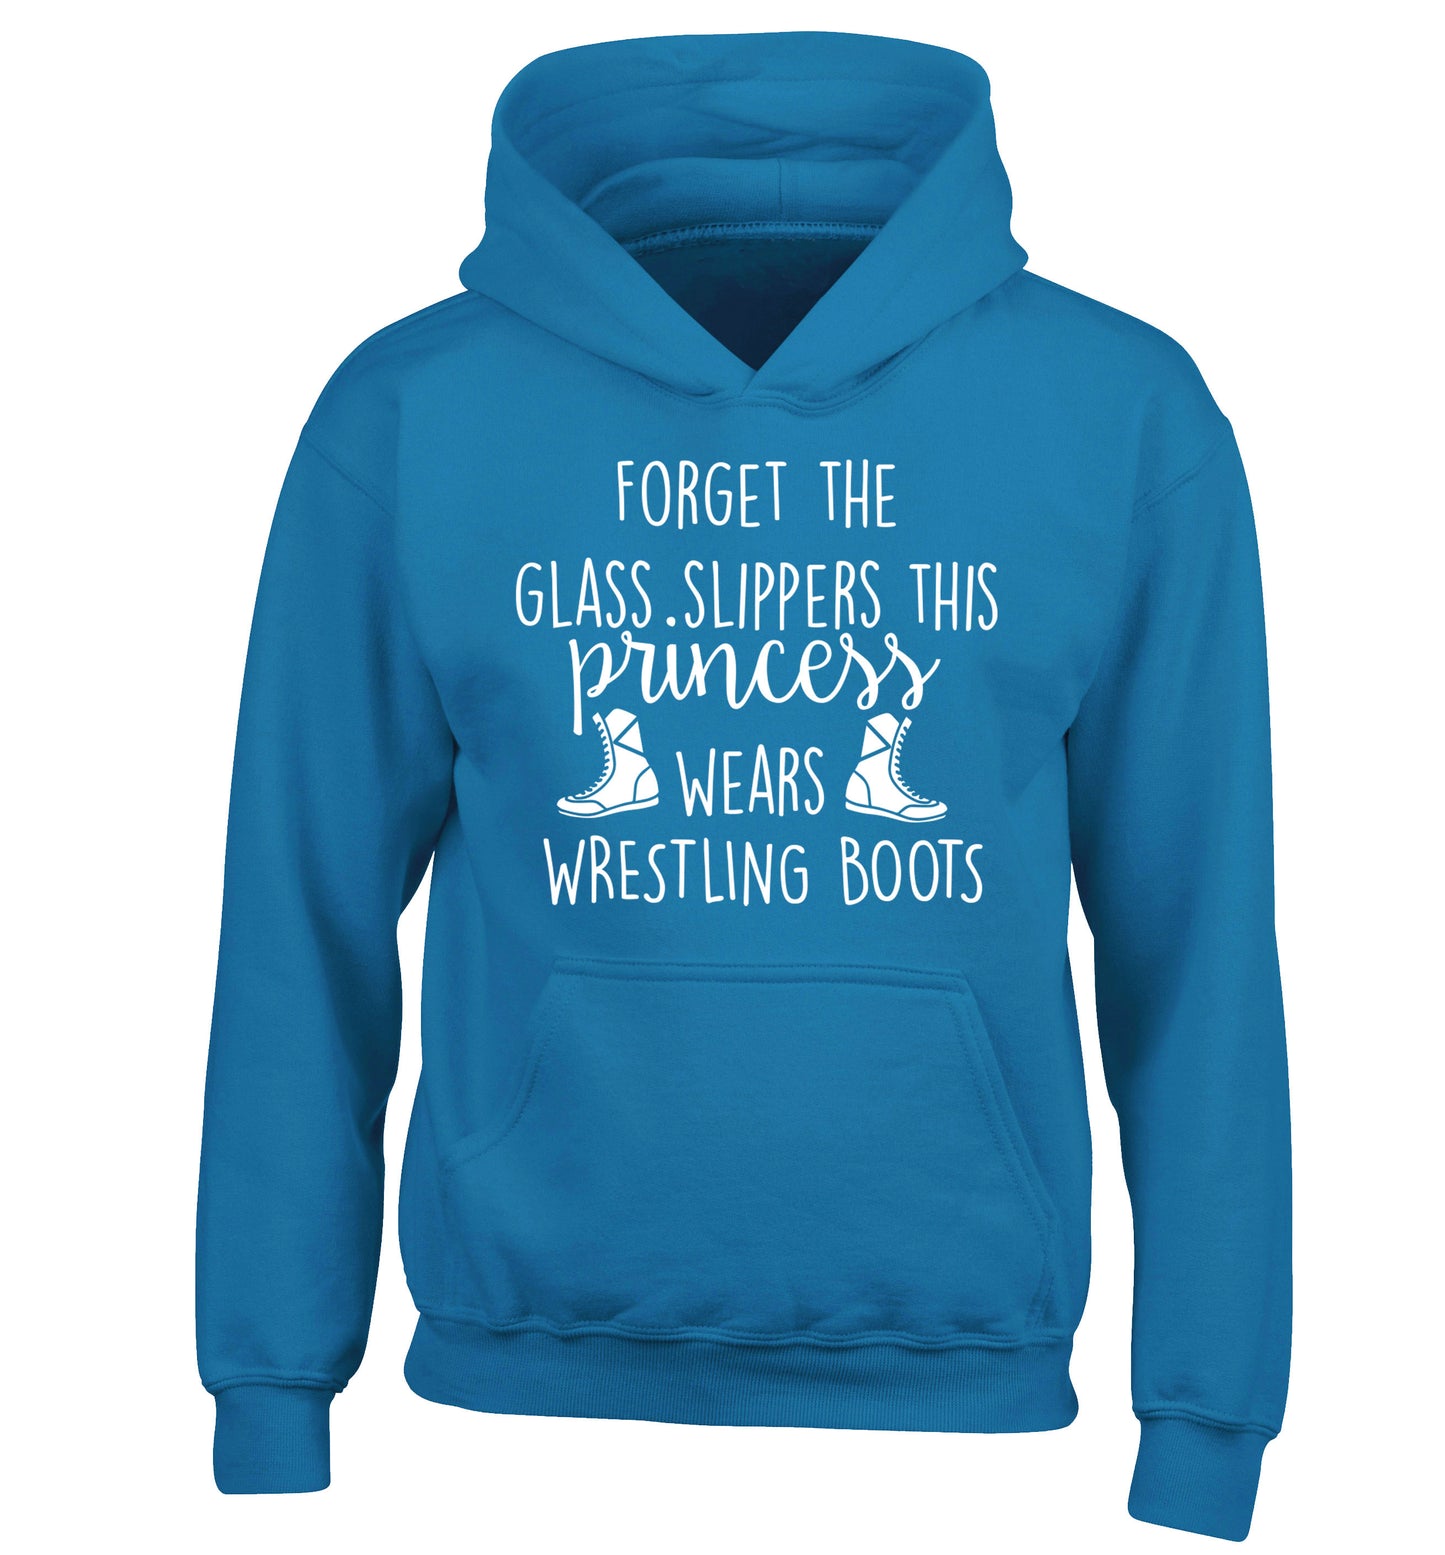 Forget the glass slippers this princess wears wrestling boots children's blue hoodie 12-14 Years